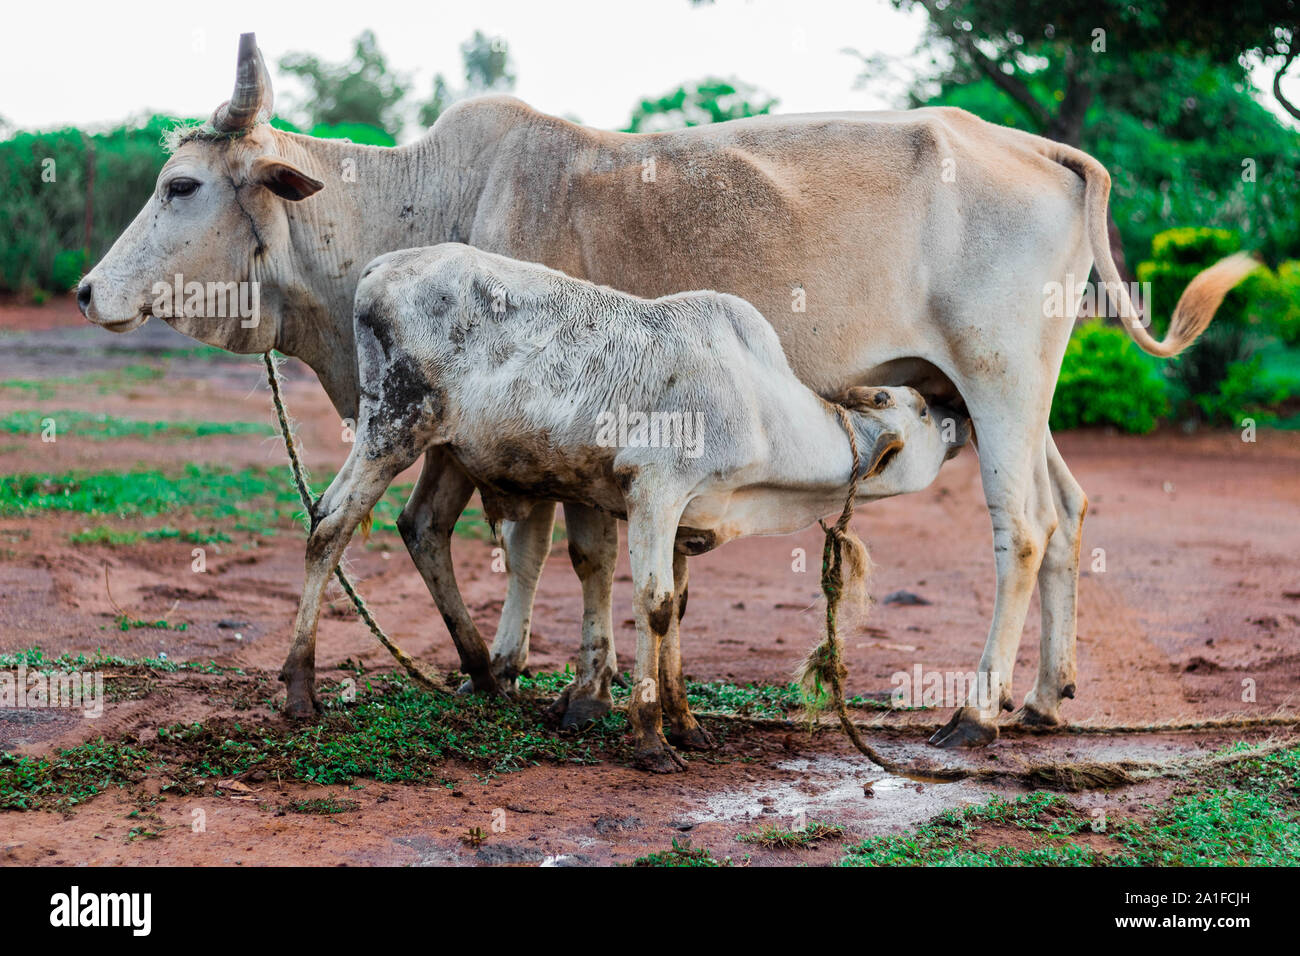 White calf suckling female cow with horns Stock Photo